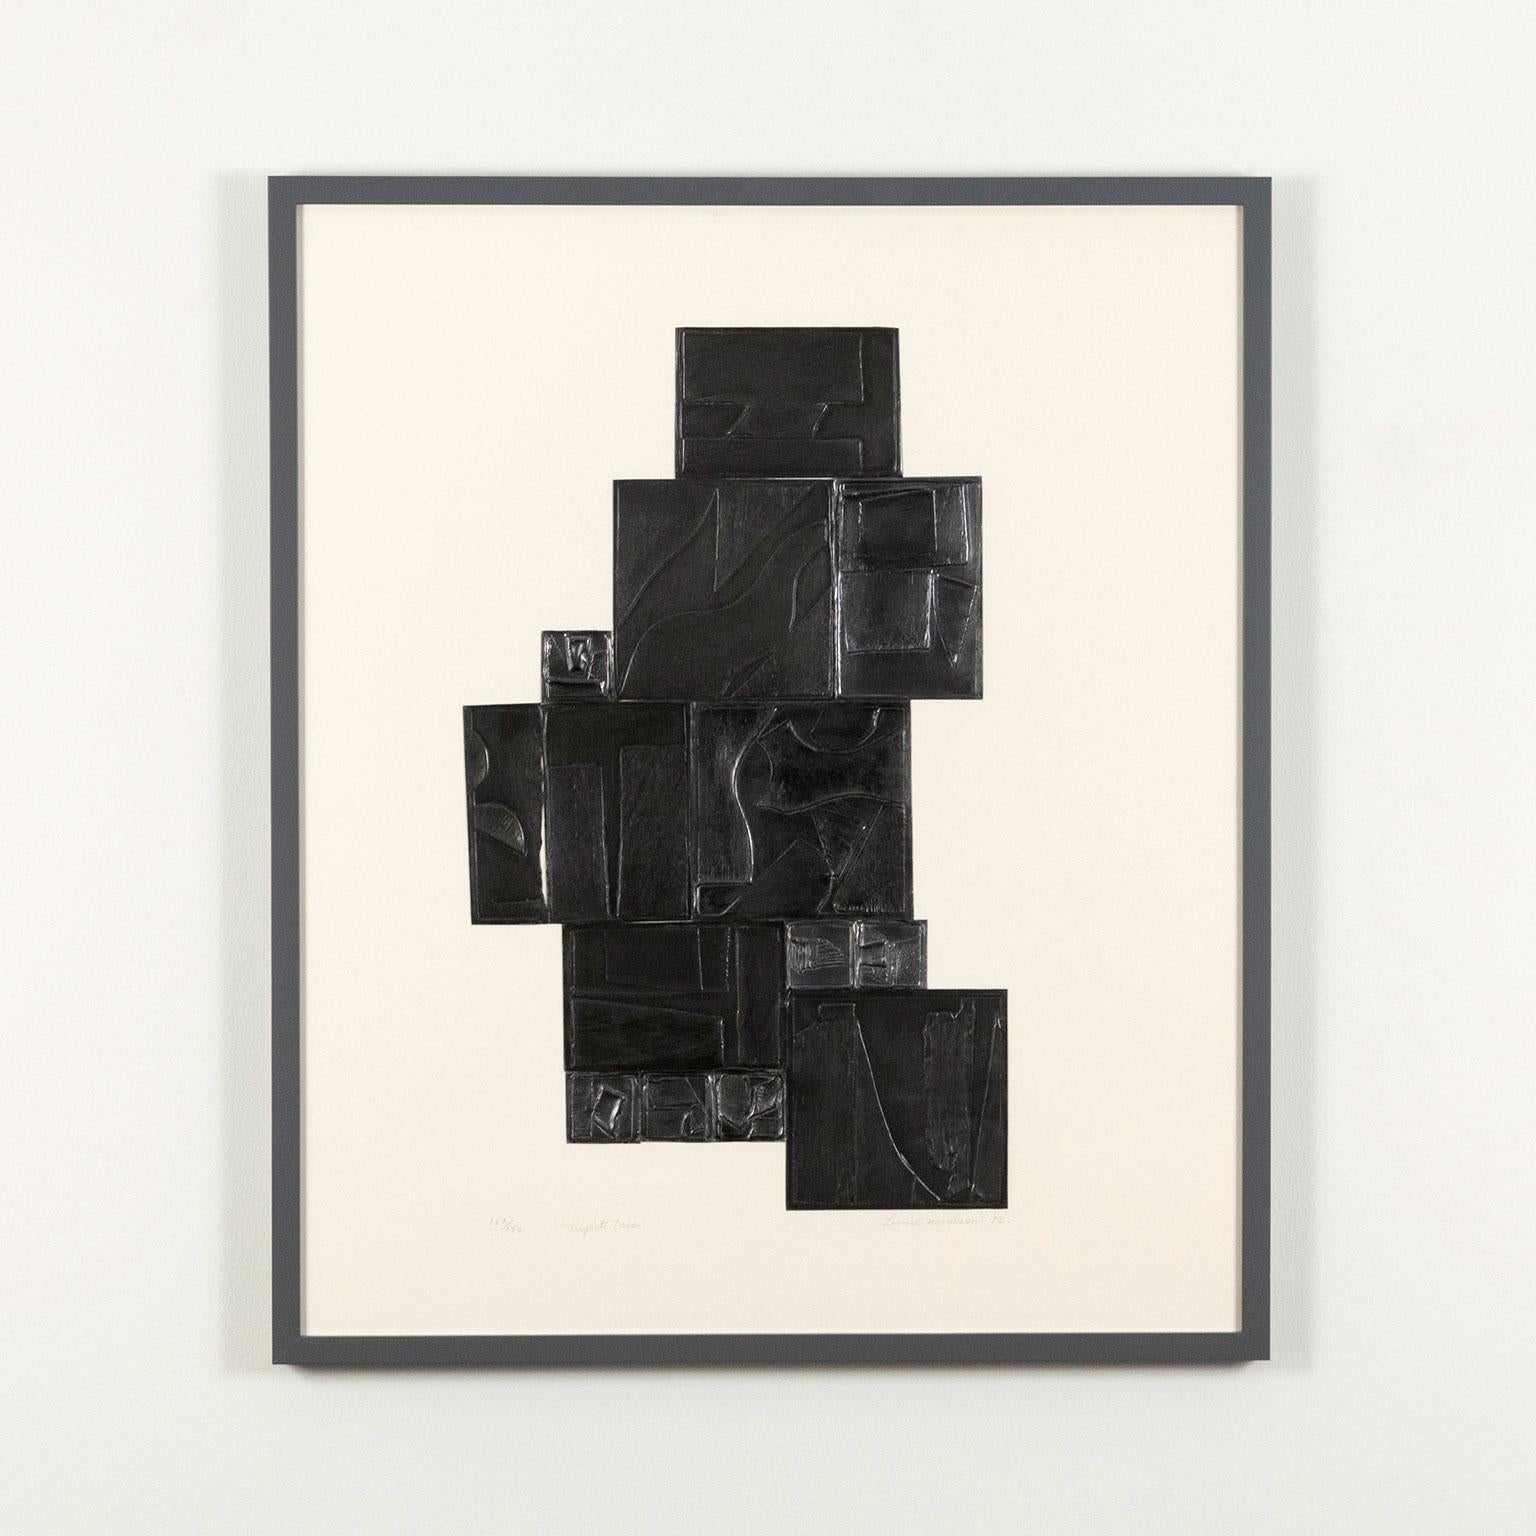 What elements of art did Louise Nevelson use?